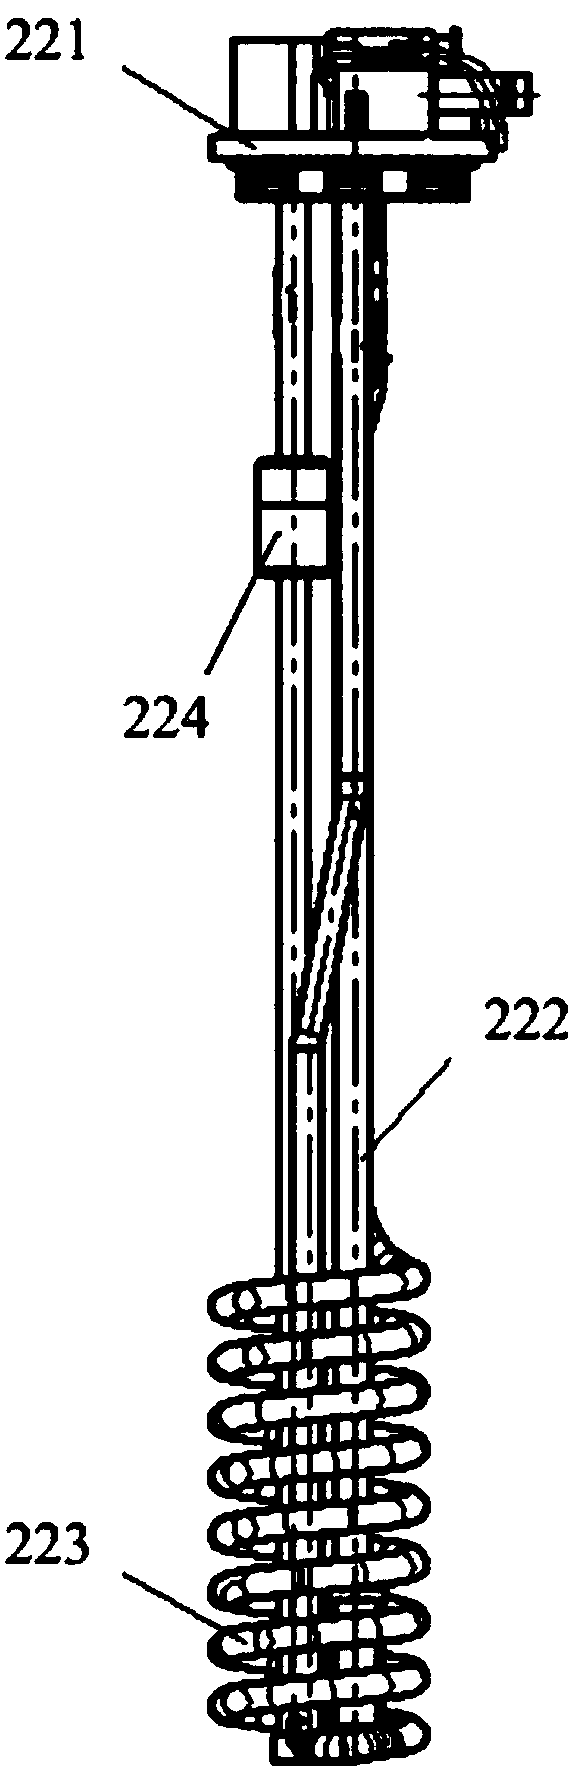 Double-oil-tank oil supply system